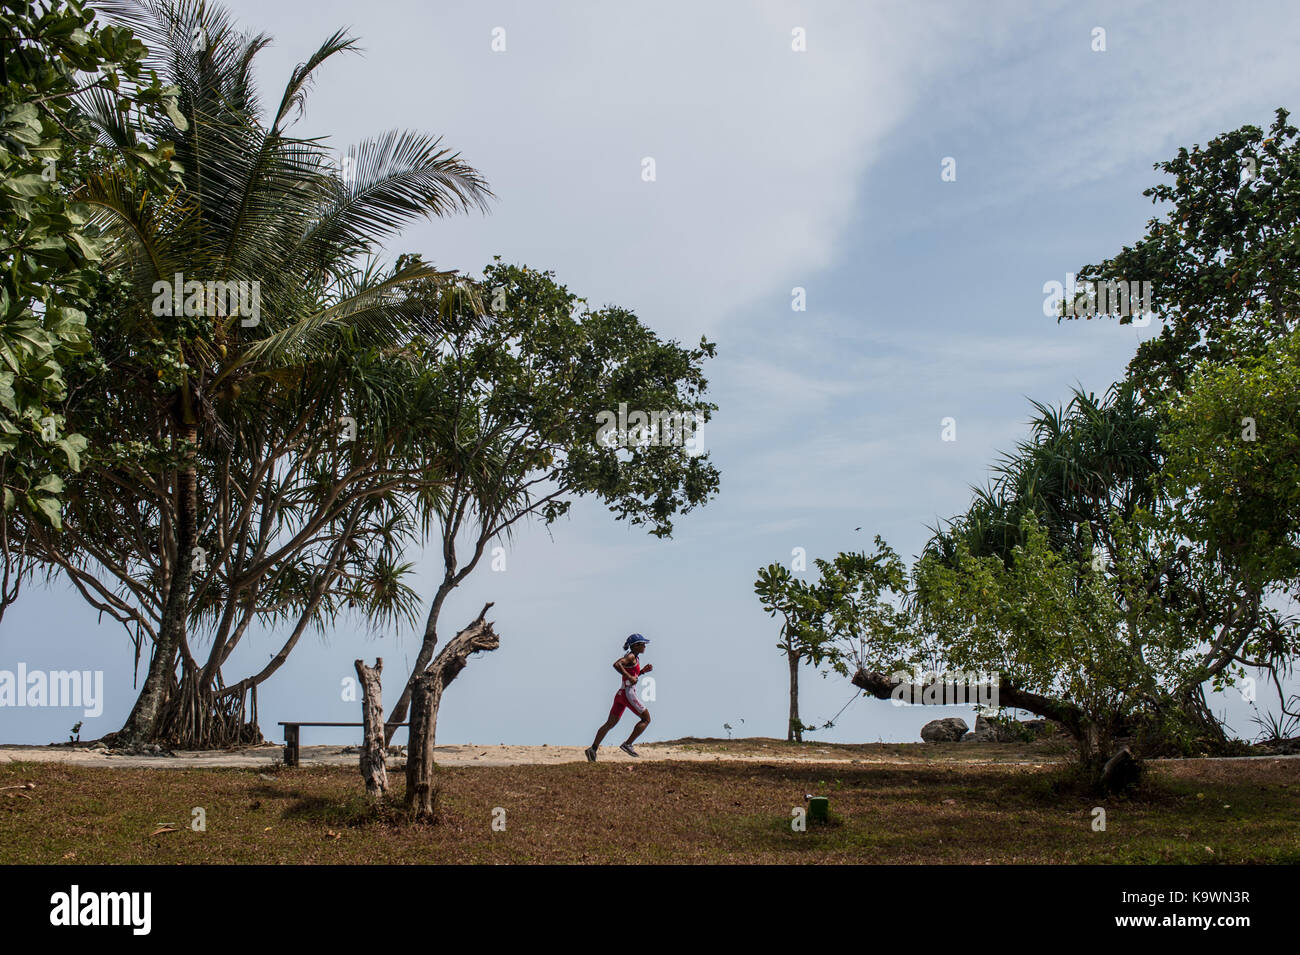 Pandeglang, Banten Province in Indonesia. 24th Sep, 2017. A female participant runs during Cross Triathlon competition at Tanjung Lesung, Pandeglang District, Banten Province in Indonesia, Sept. 24, 2017. Credit: Veri Sanovri/Xinhua/Alamy Live News Stock Photo